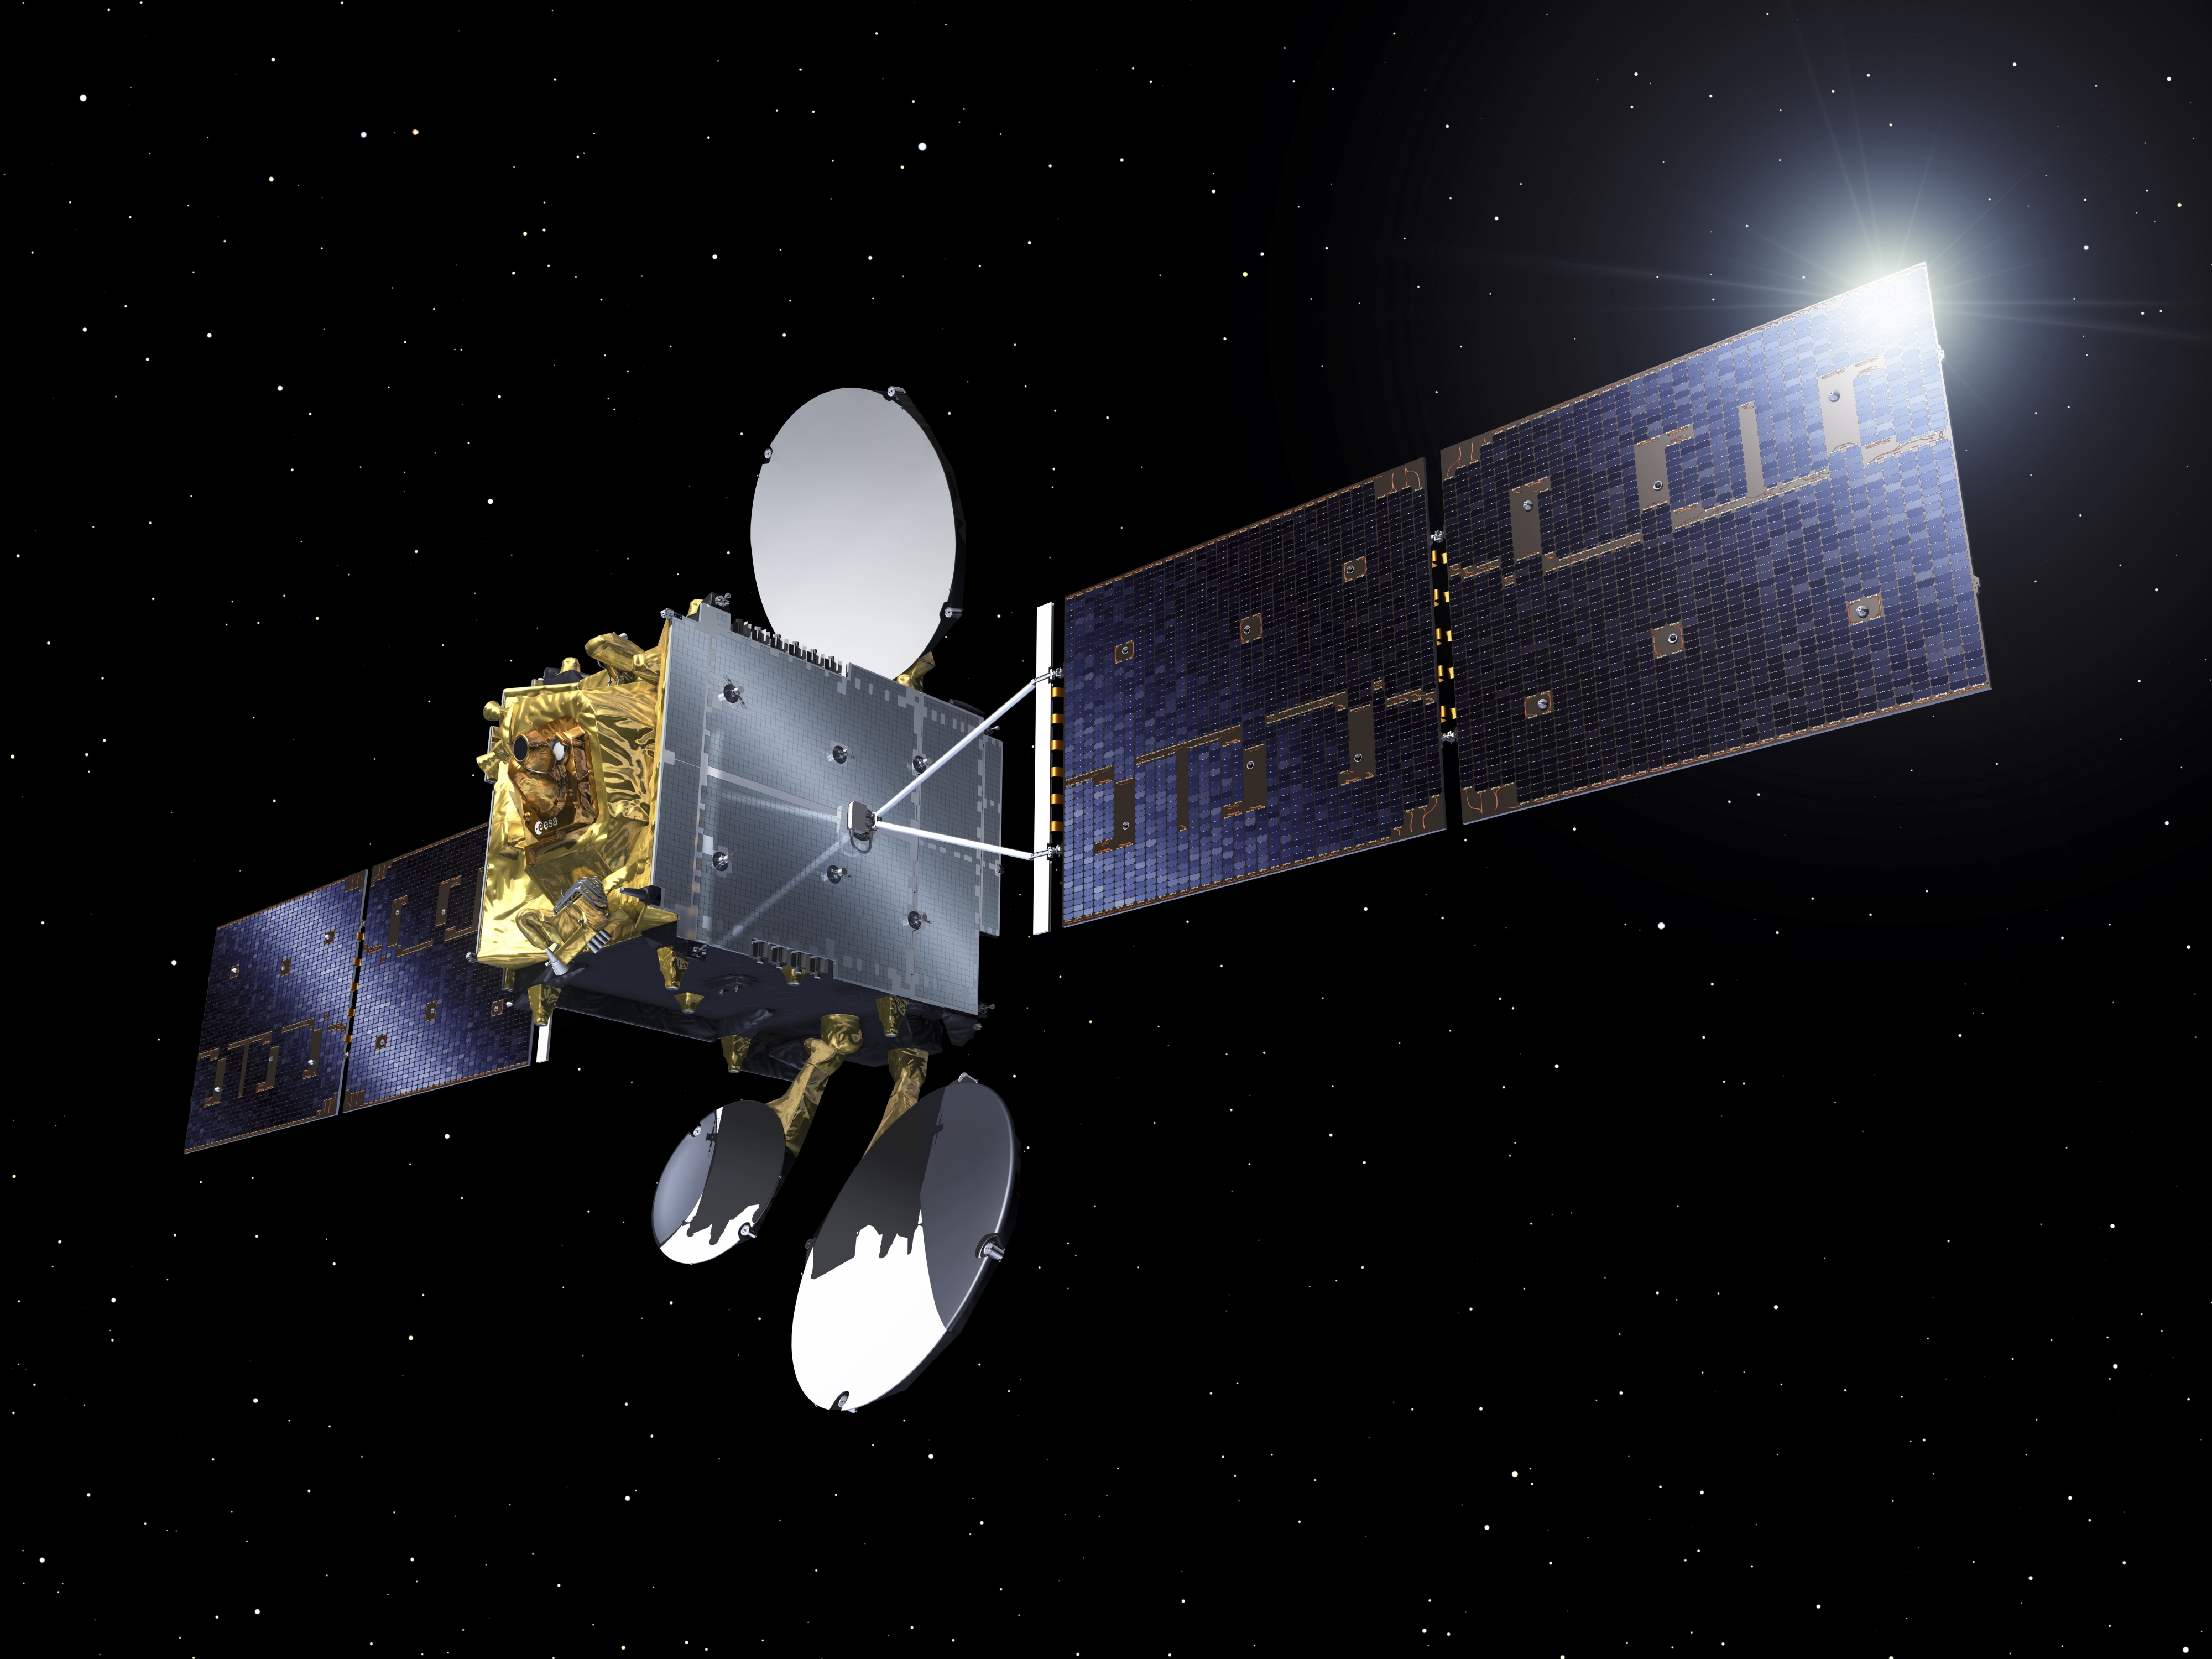 EDRS-C is the second node of the European Data Relay System (EDRS). It is the first dedicated EDRS satellite as well as the first flight for ESA’s SmallGEO platform.